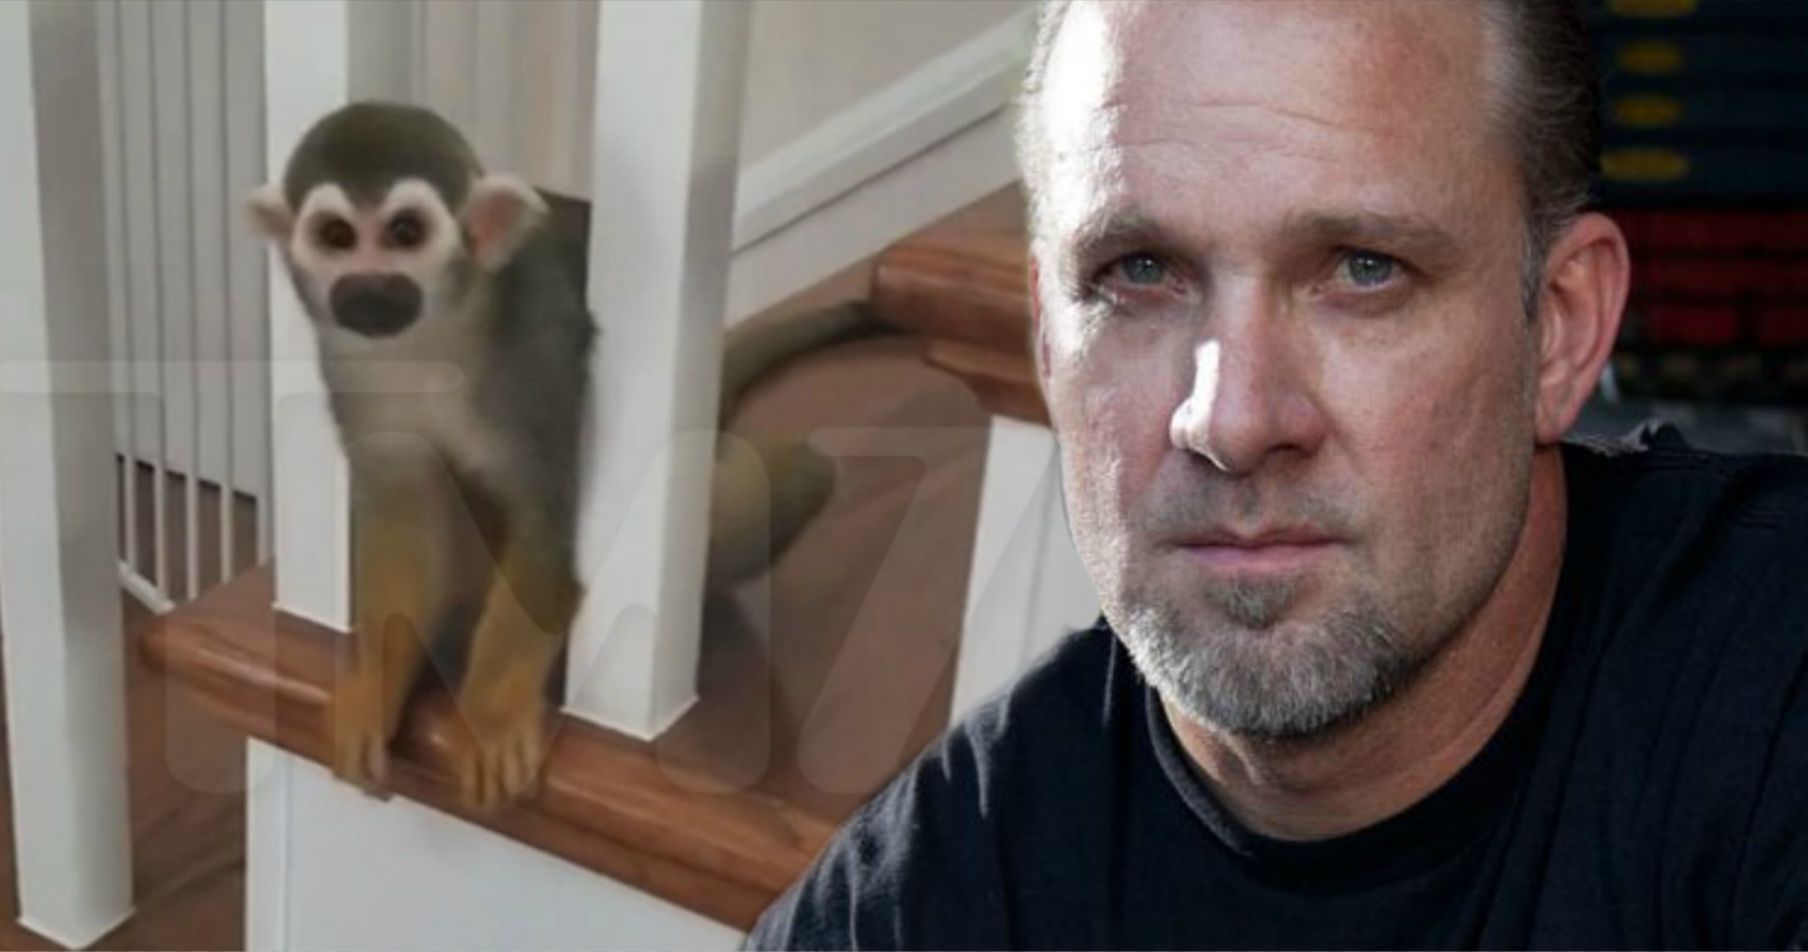 Jesse James' Pet Monkey Broke Into a Neighbor's Home Looking for Love